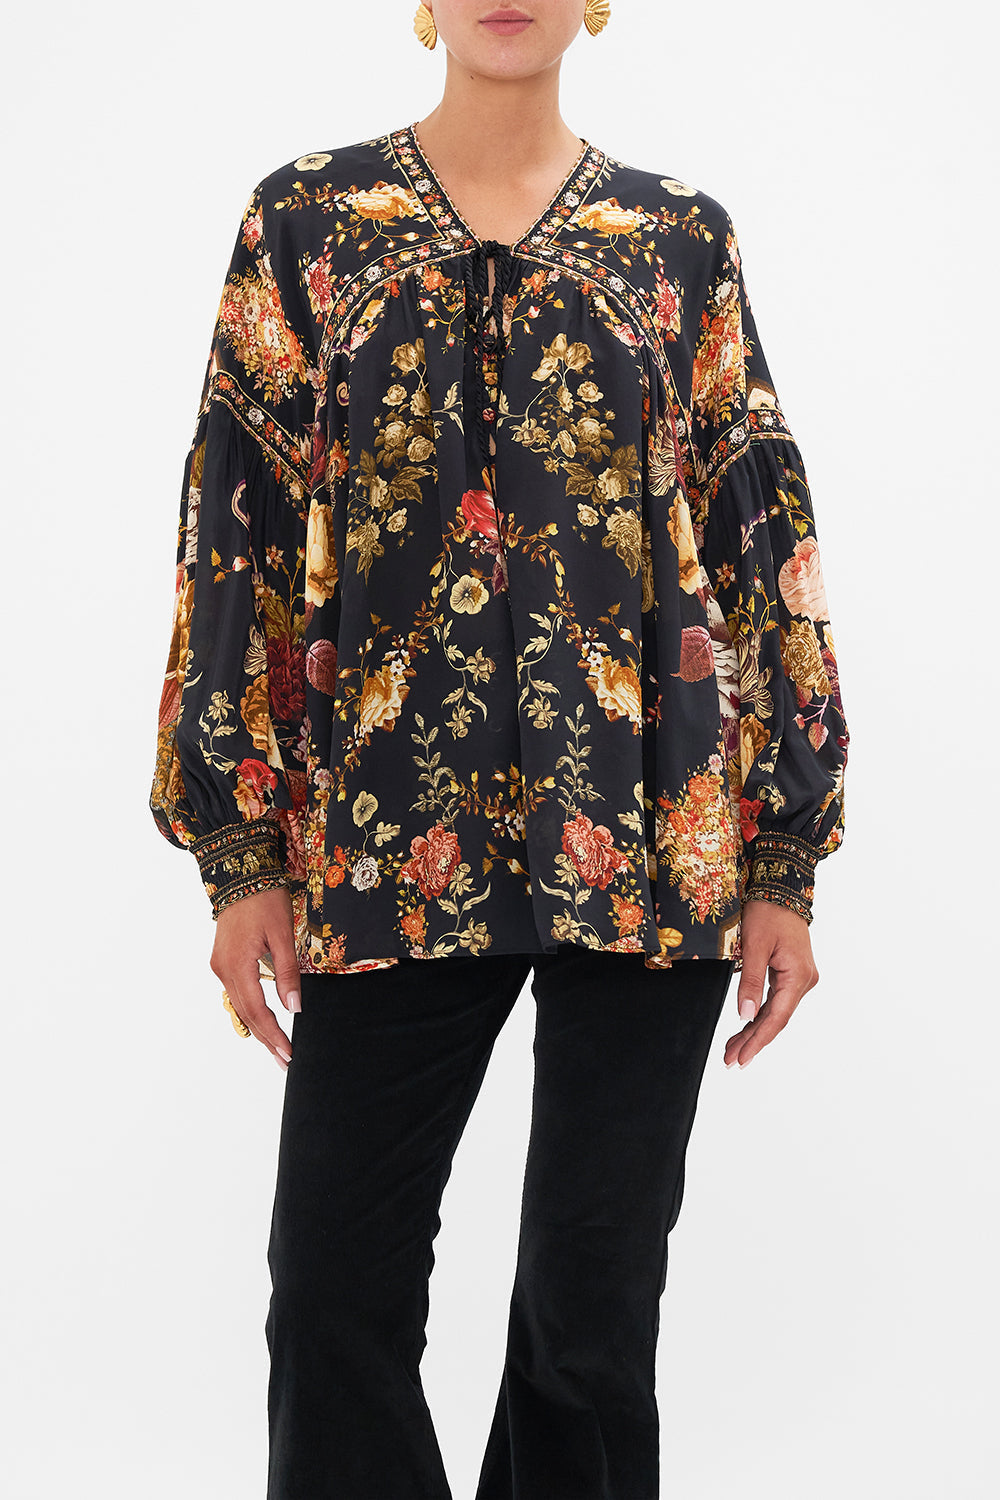 CAMILLA Floral Blouson Blouse with Neck Tie in Stitched in Time print